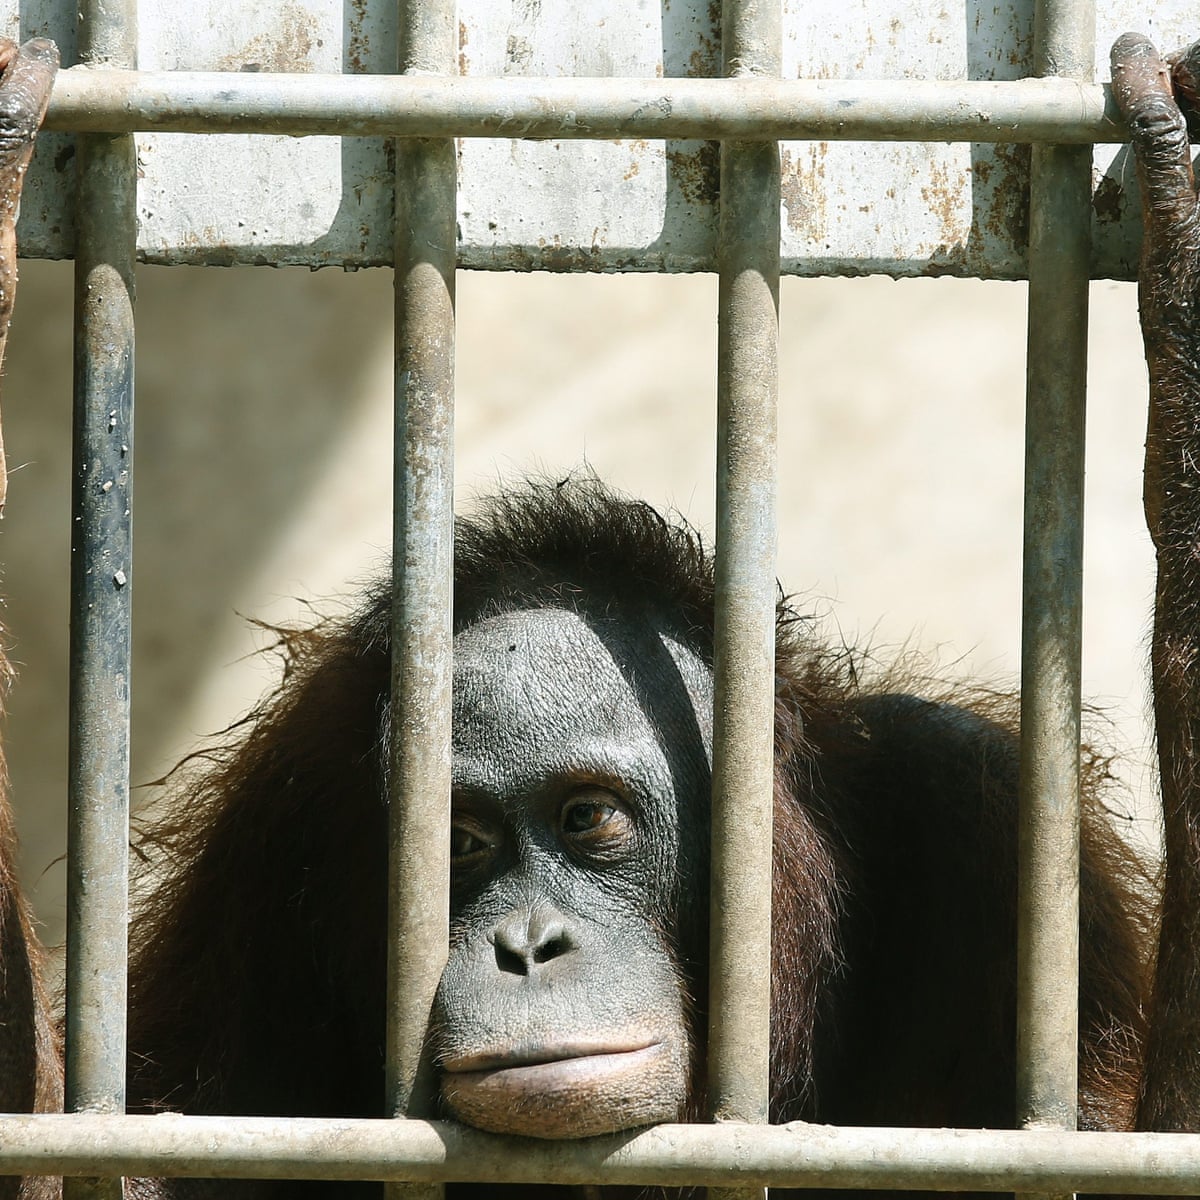 animals should not be kept in cages debate